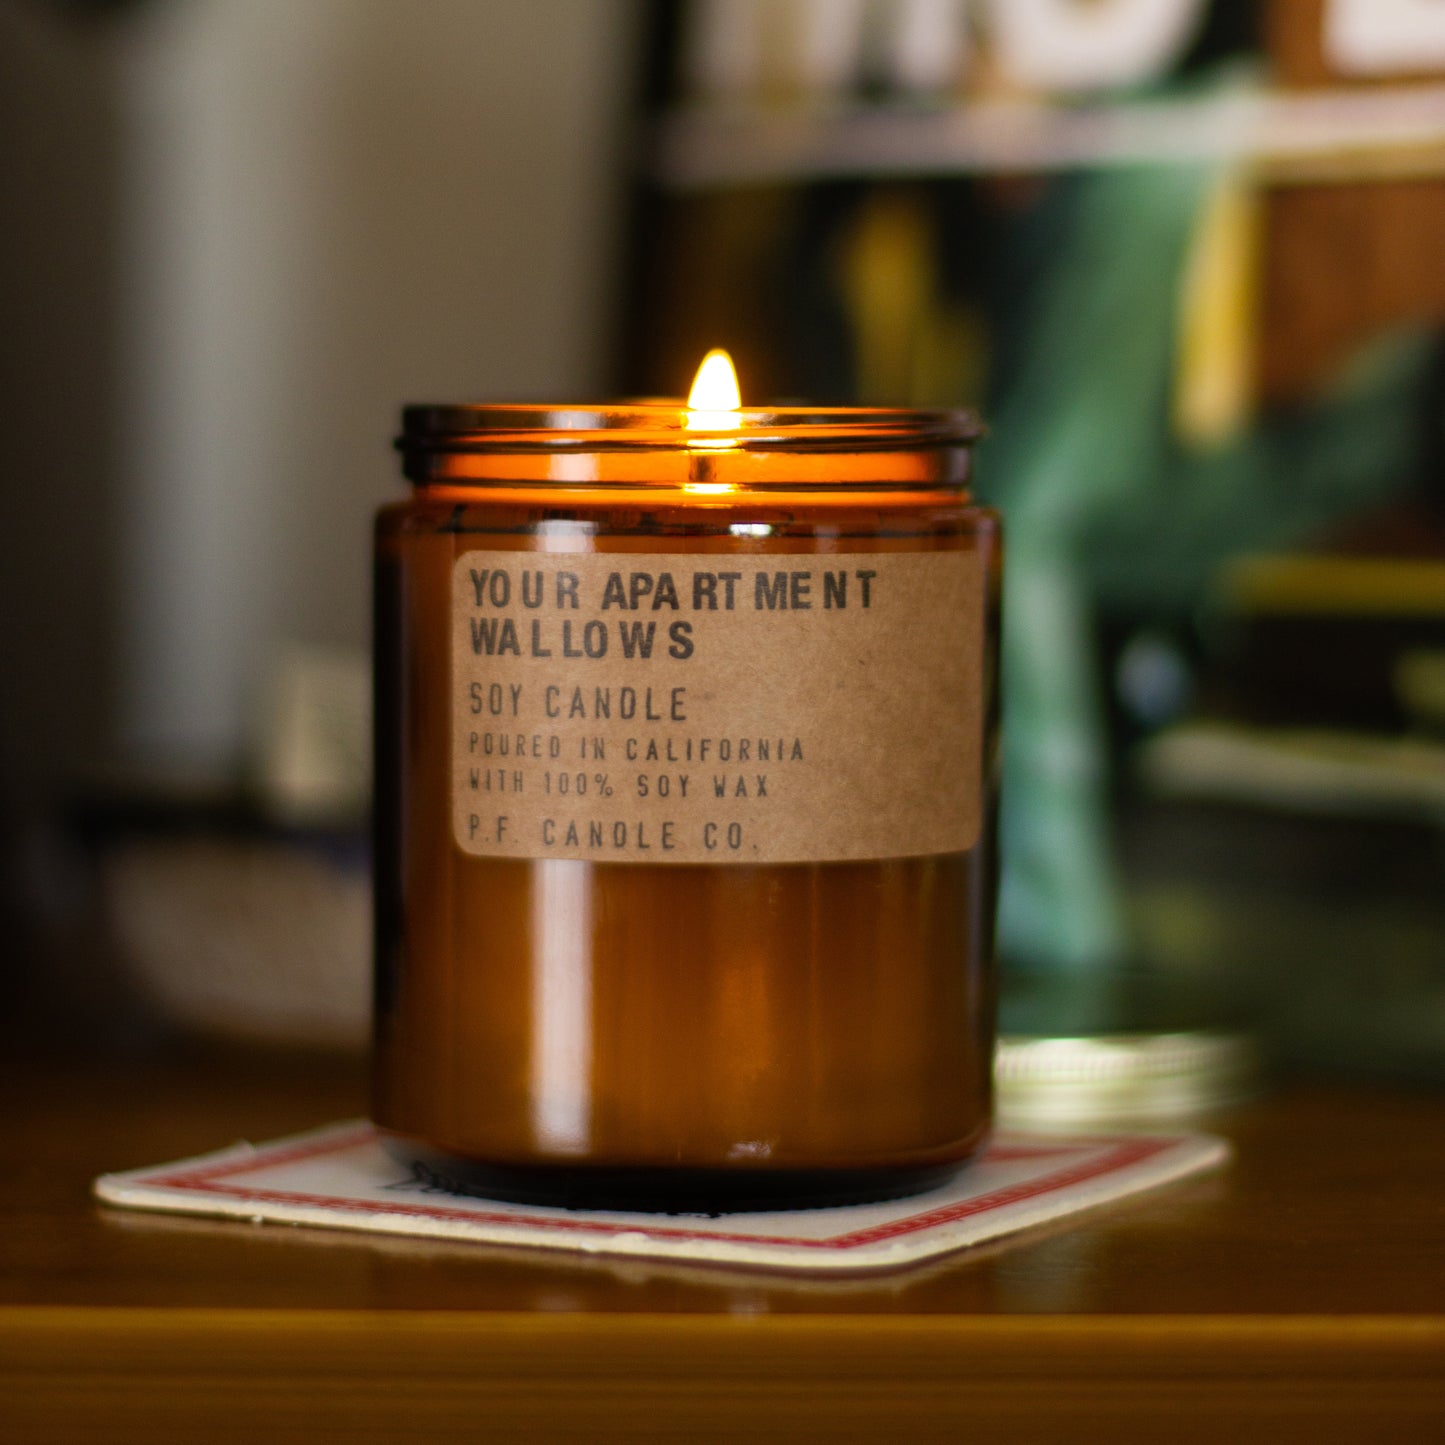 Wallows x P.F. Candle Co. - "Your Apartment" Candle